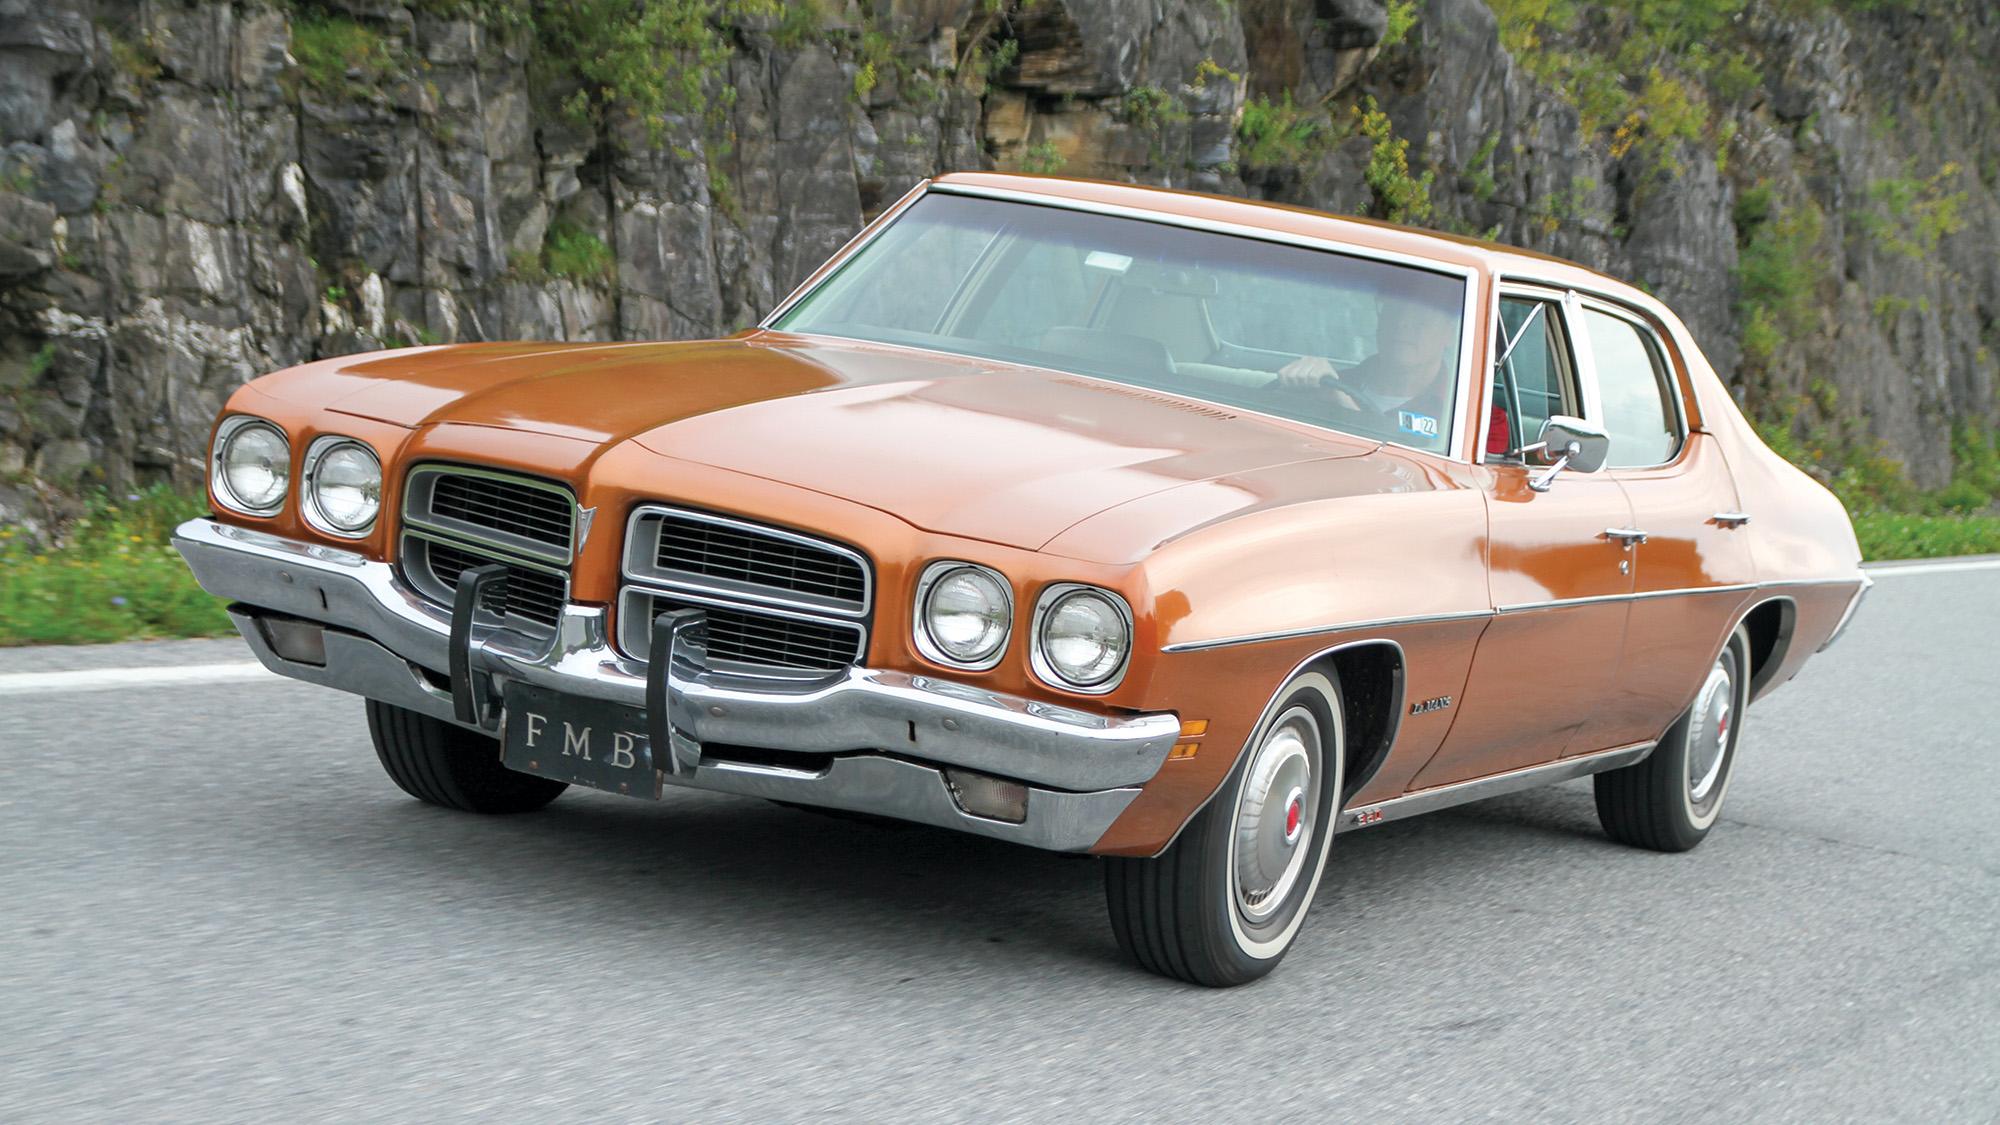 The sale of a cherished 1972 Pontiac Le Mans led to a quest culminating with a near duplicate